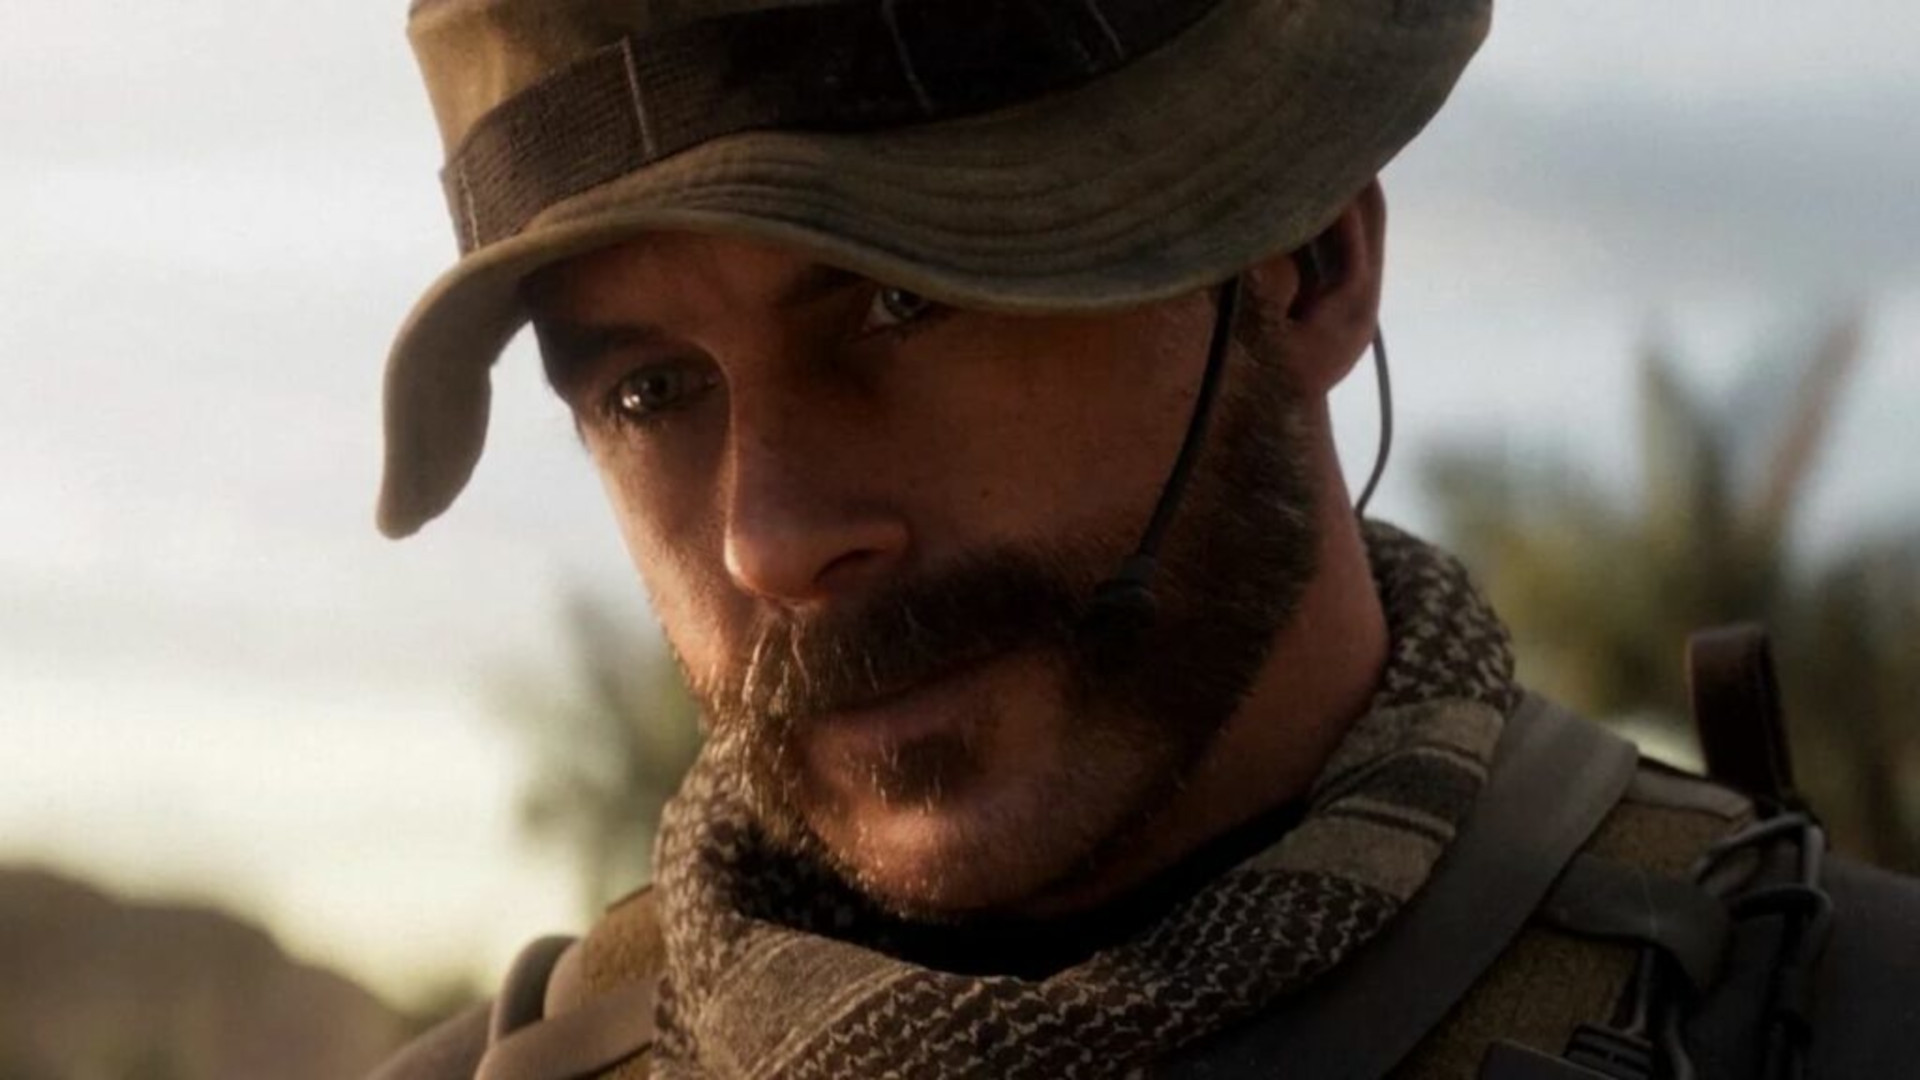 New Call of Duty campaign might be more Far Cry, less CoD